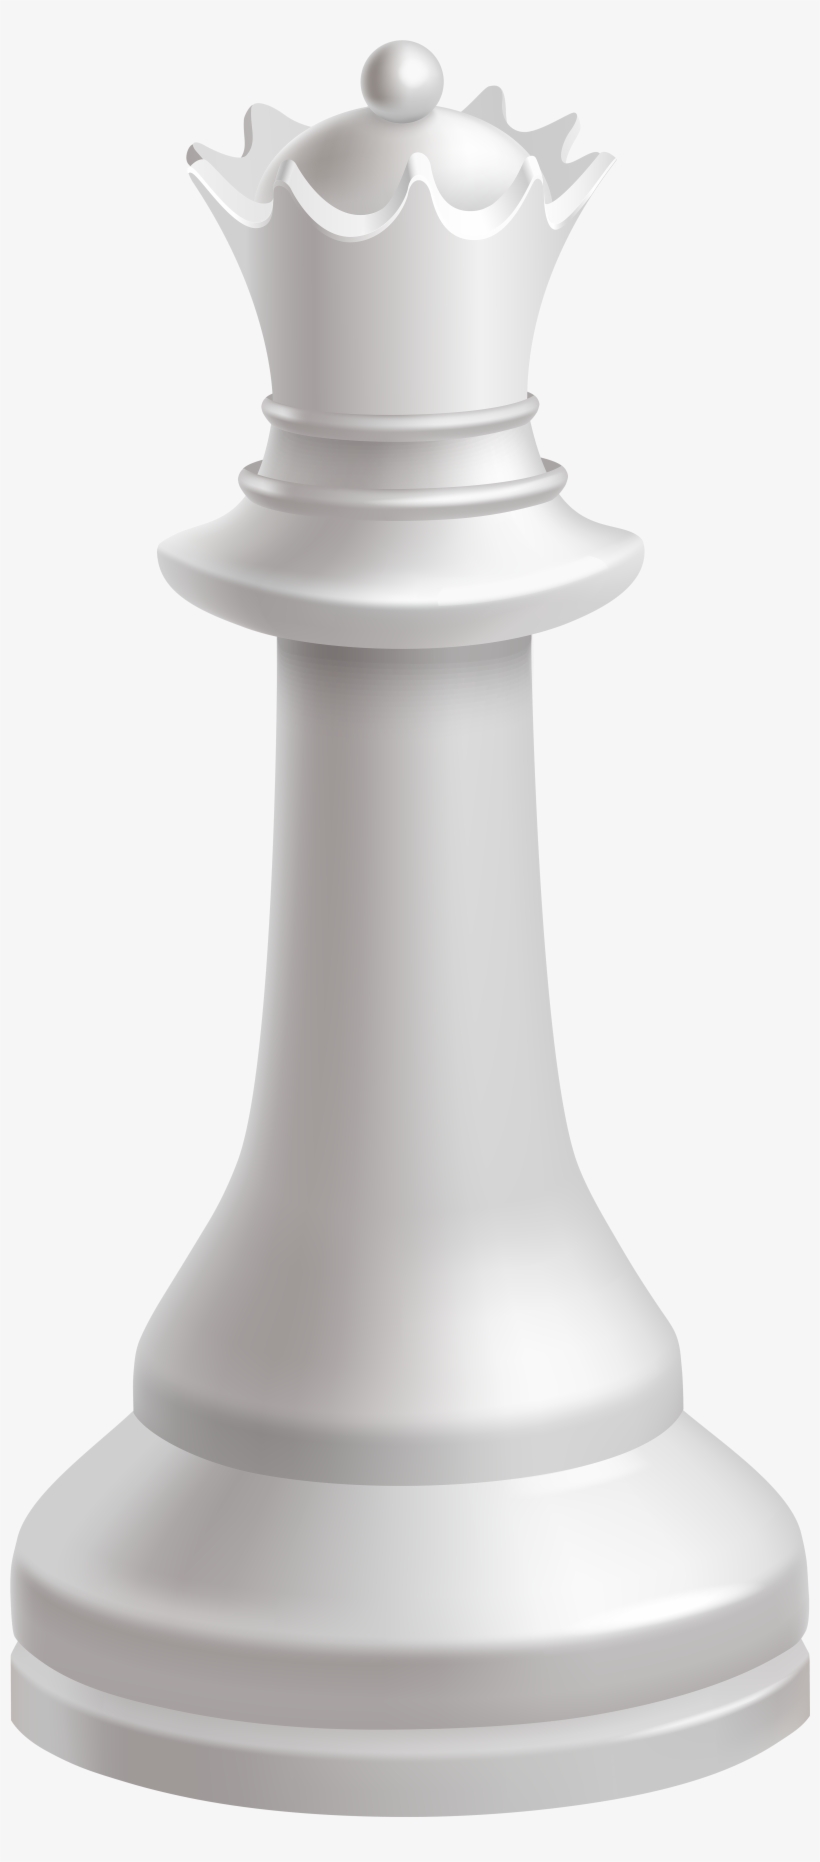 Free Png Queen White Chess Piece Png Images Transparent - King Chess